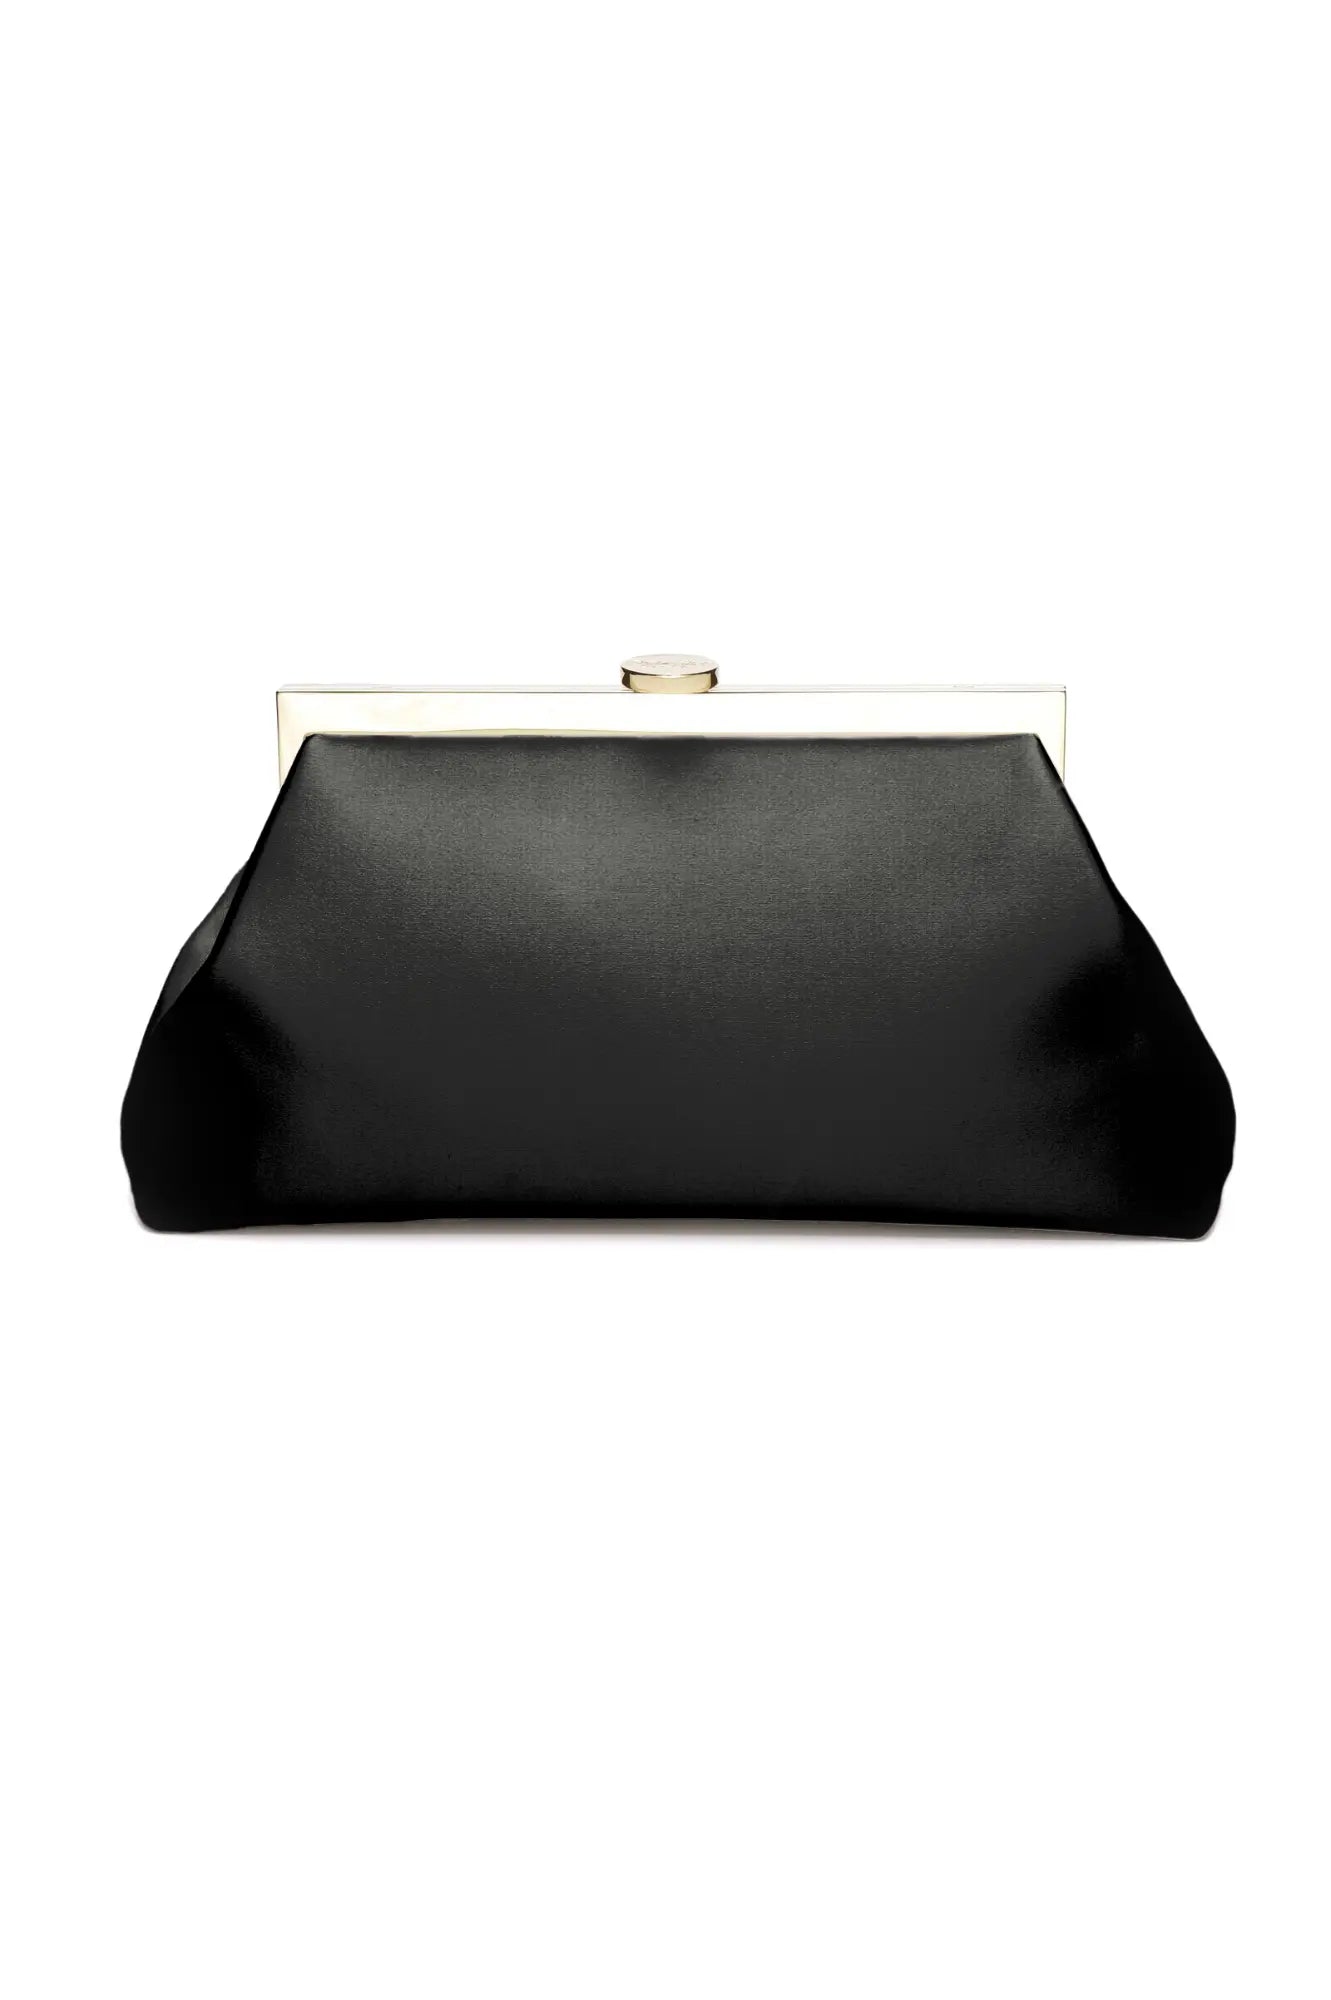 Rosa Clutch - Nera Black evening clutch from The Bella Rosa Collection with a metallic clasp and frame.